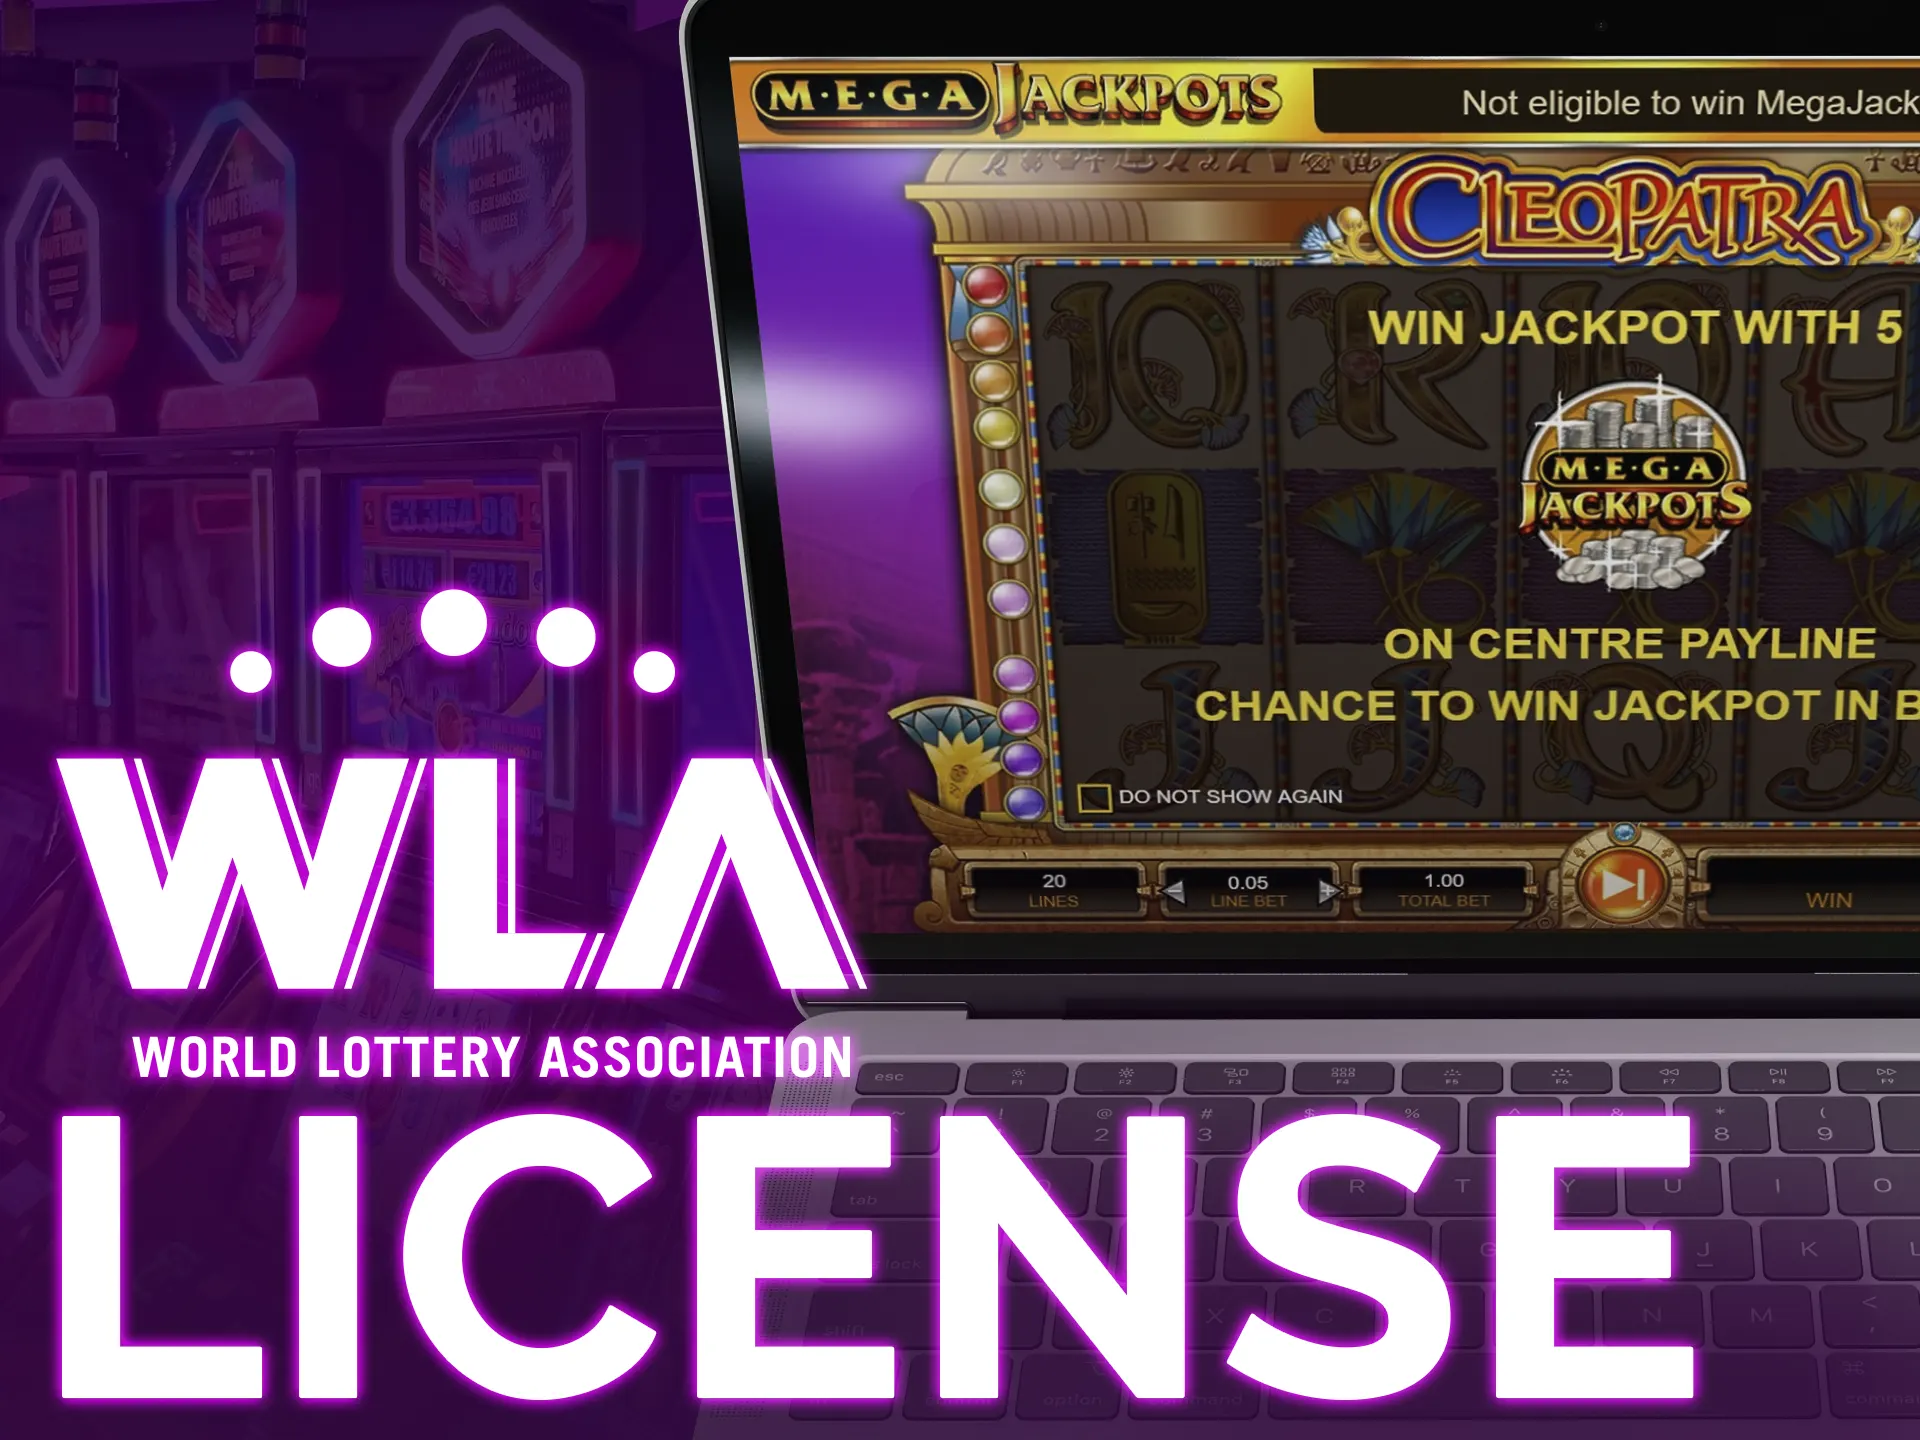 Play in safe and secure games, licensed by World Lottery Assosiation.